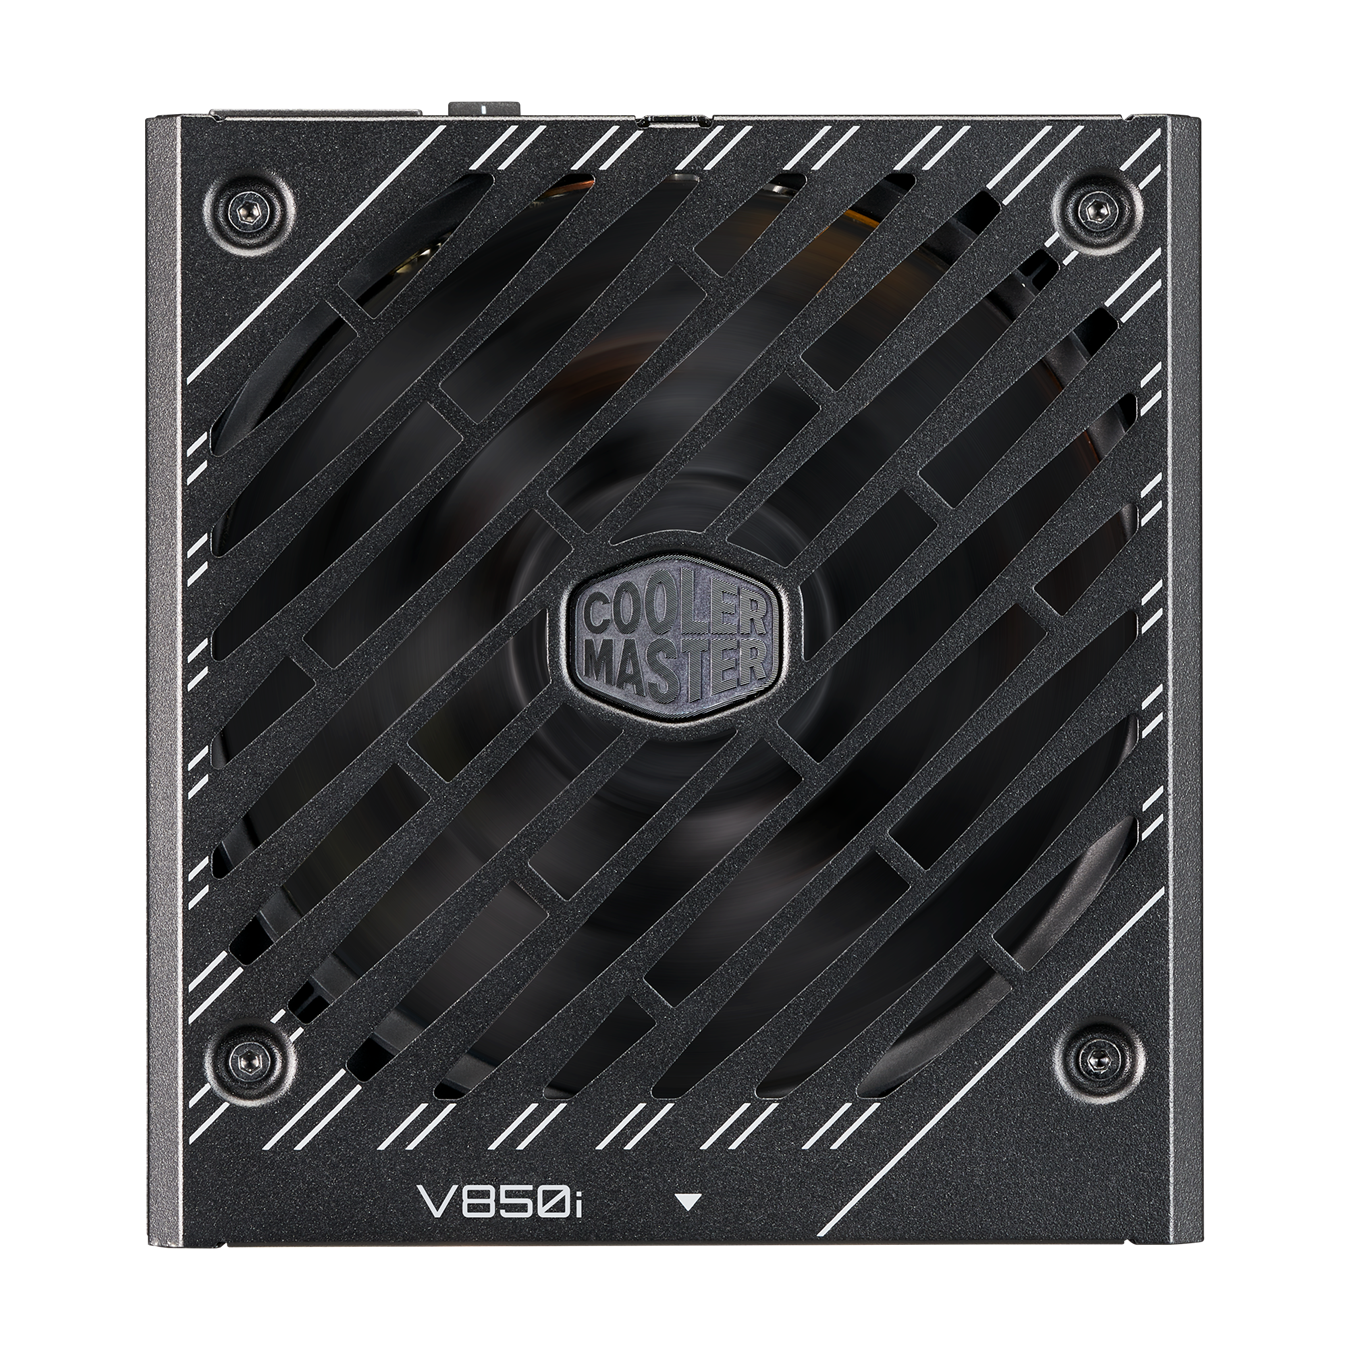 V850 Gold I - The 135mm silent fan creates less friction, making it great for low RPM operations while delivering quiet cooling performance.